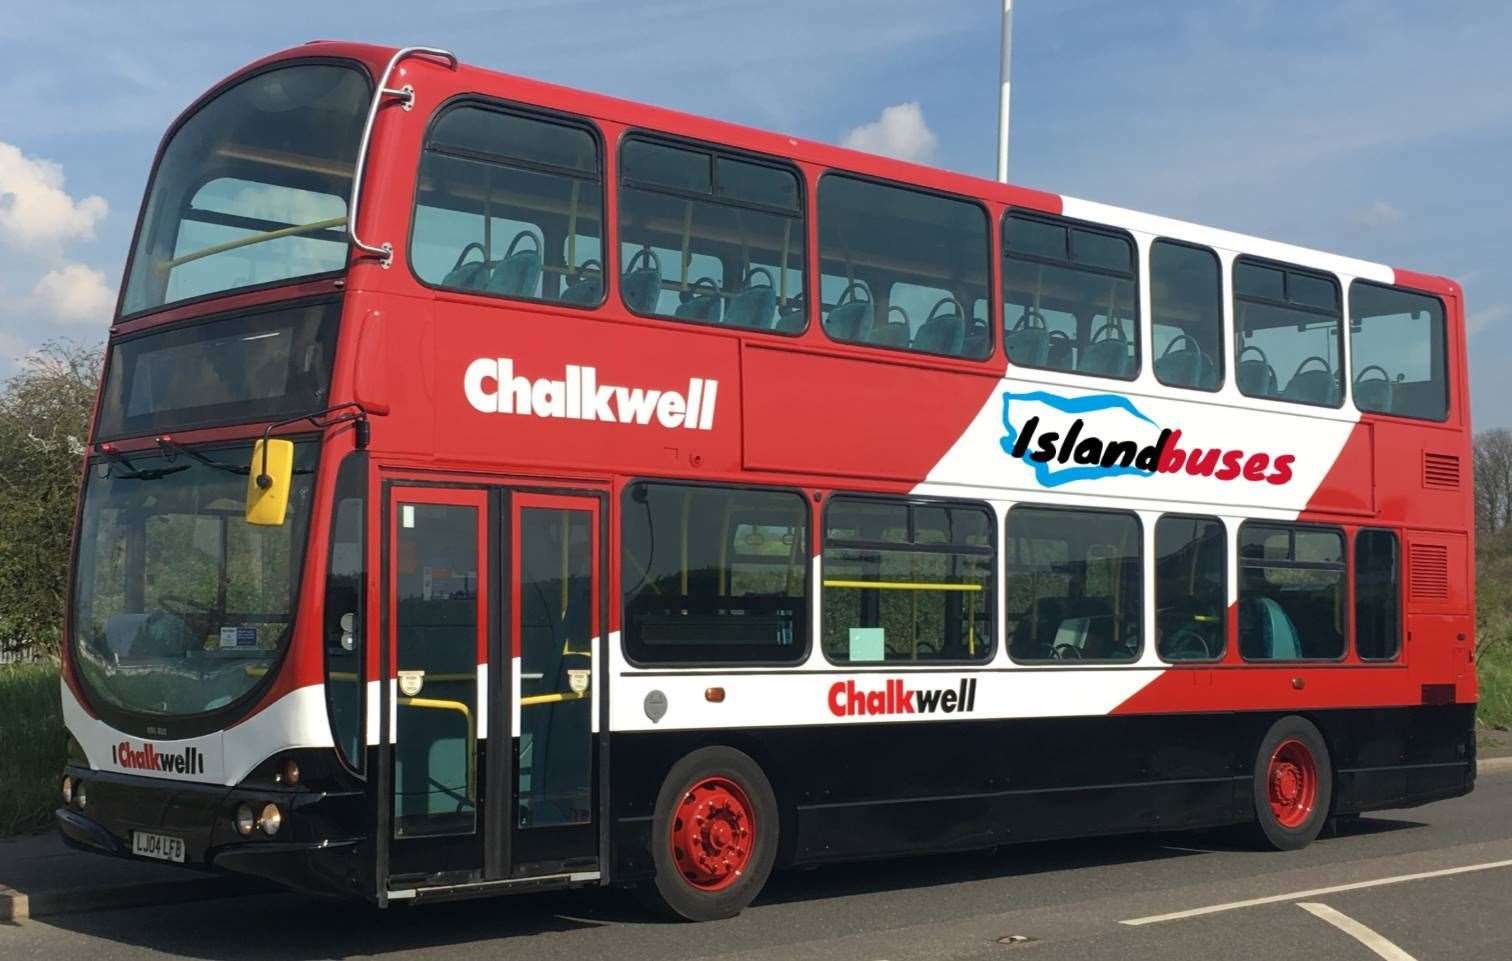 Chalkwell provided the 332 service which is having its funding cuts